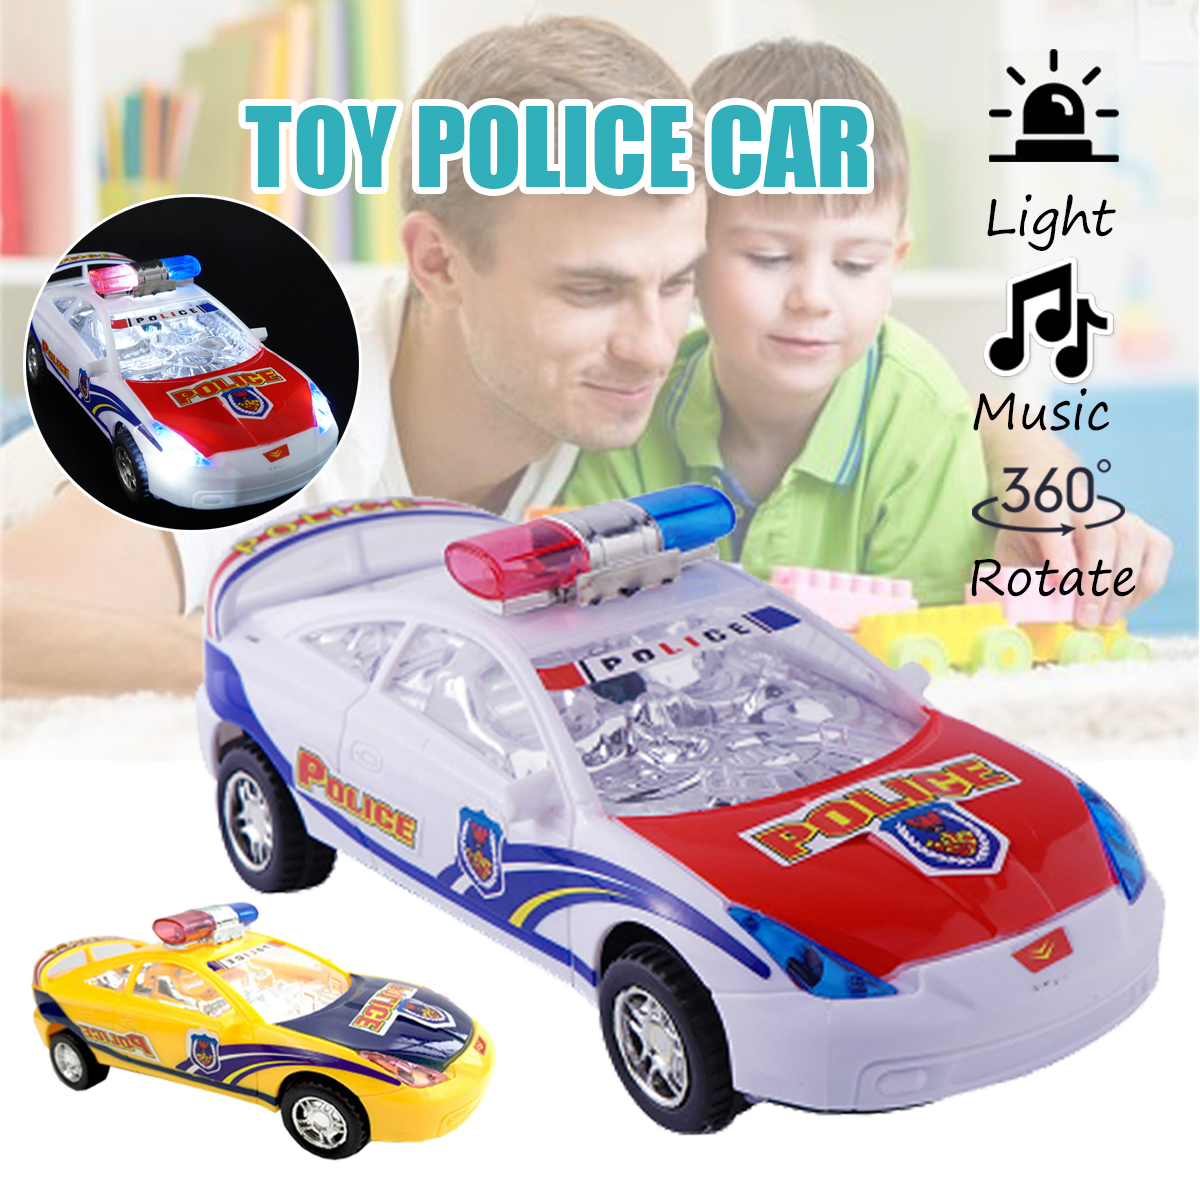 Childrens-Electric-Alloy-Simulation-Po-lice-Car-Diecast-Model-Toy-with-LED-Light-and-Music-1604579-1